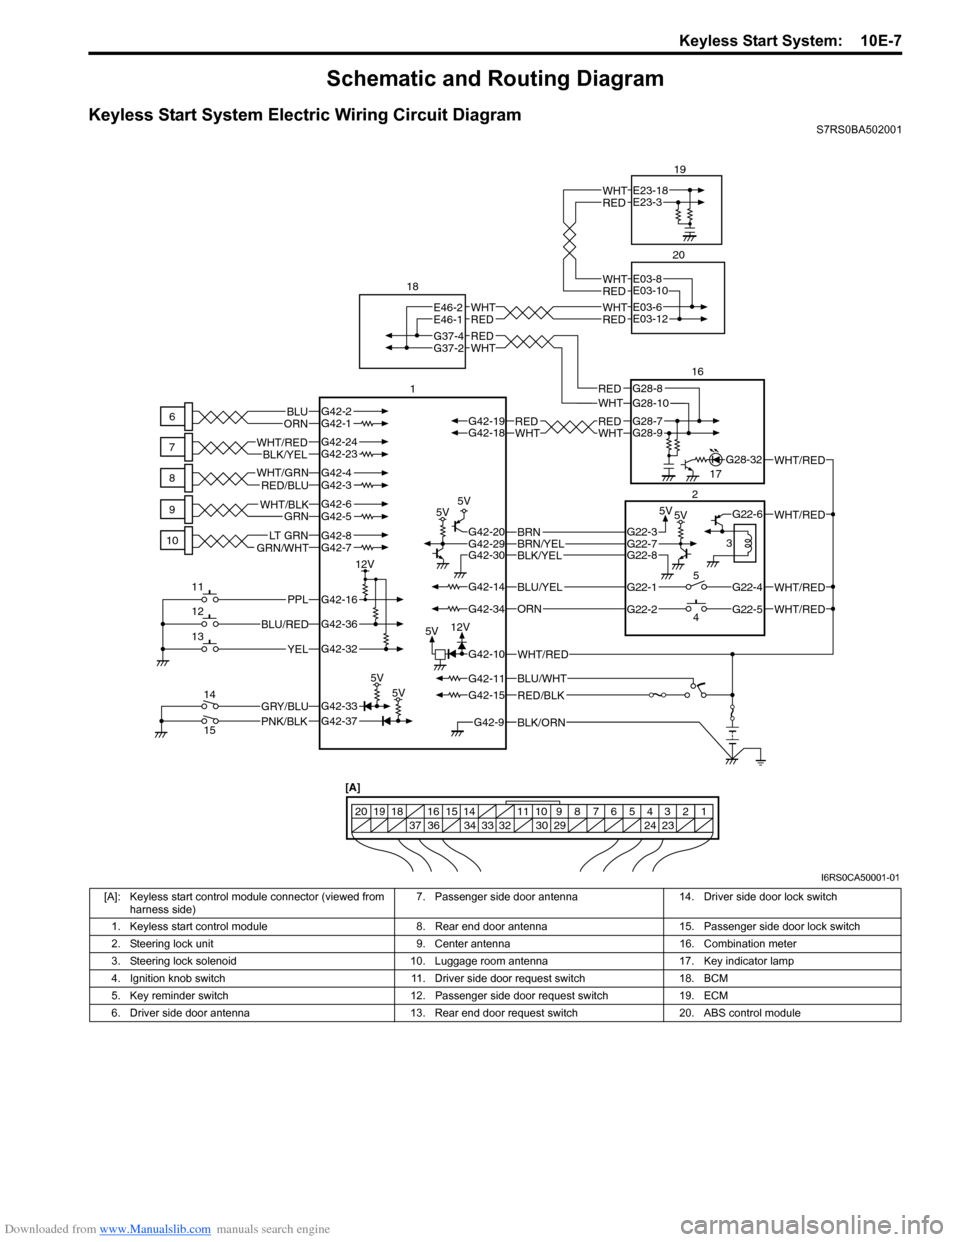 SUZUKI SWIFT 2008 2.G Service Workshop Manual Downloaded from www.Manualslib.com manuals search engine Keyless Start System:  10E-7
Schematic and Routing Diagram
Keyless Start System Electric Wiring Circuit DiagramS7RS0BA502001
BLK/ORNG42-9
G42-1